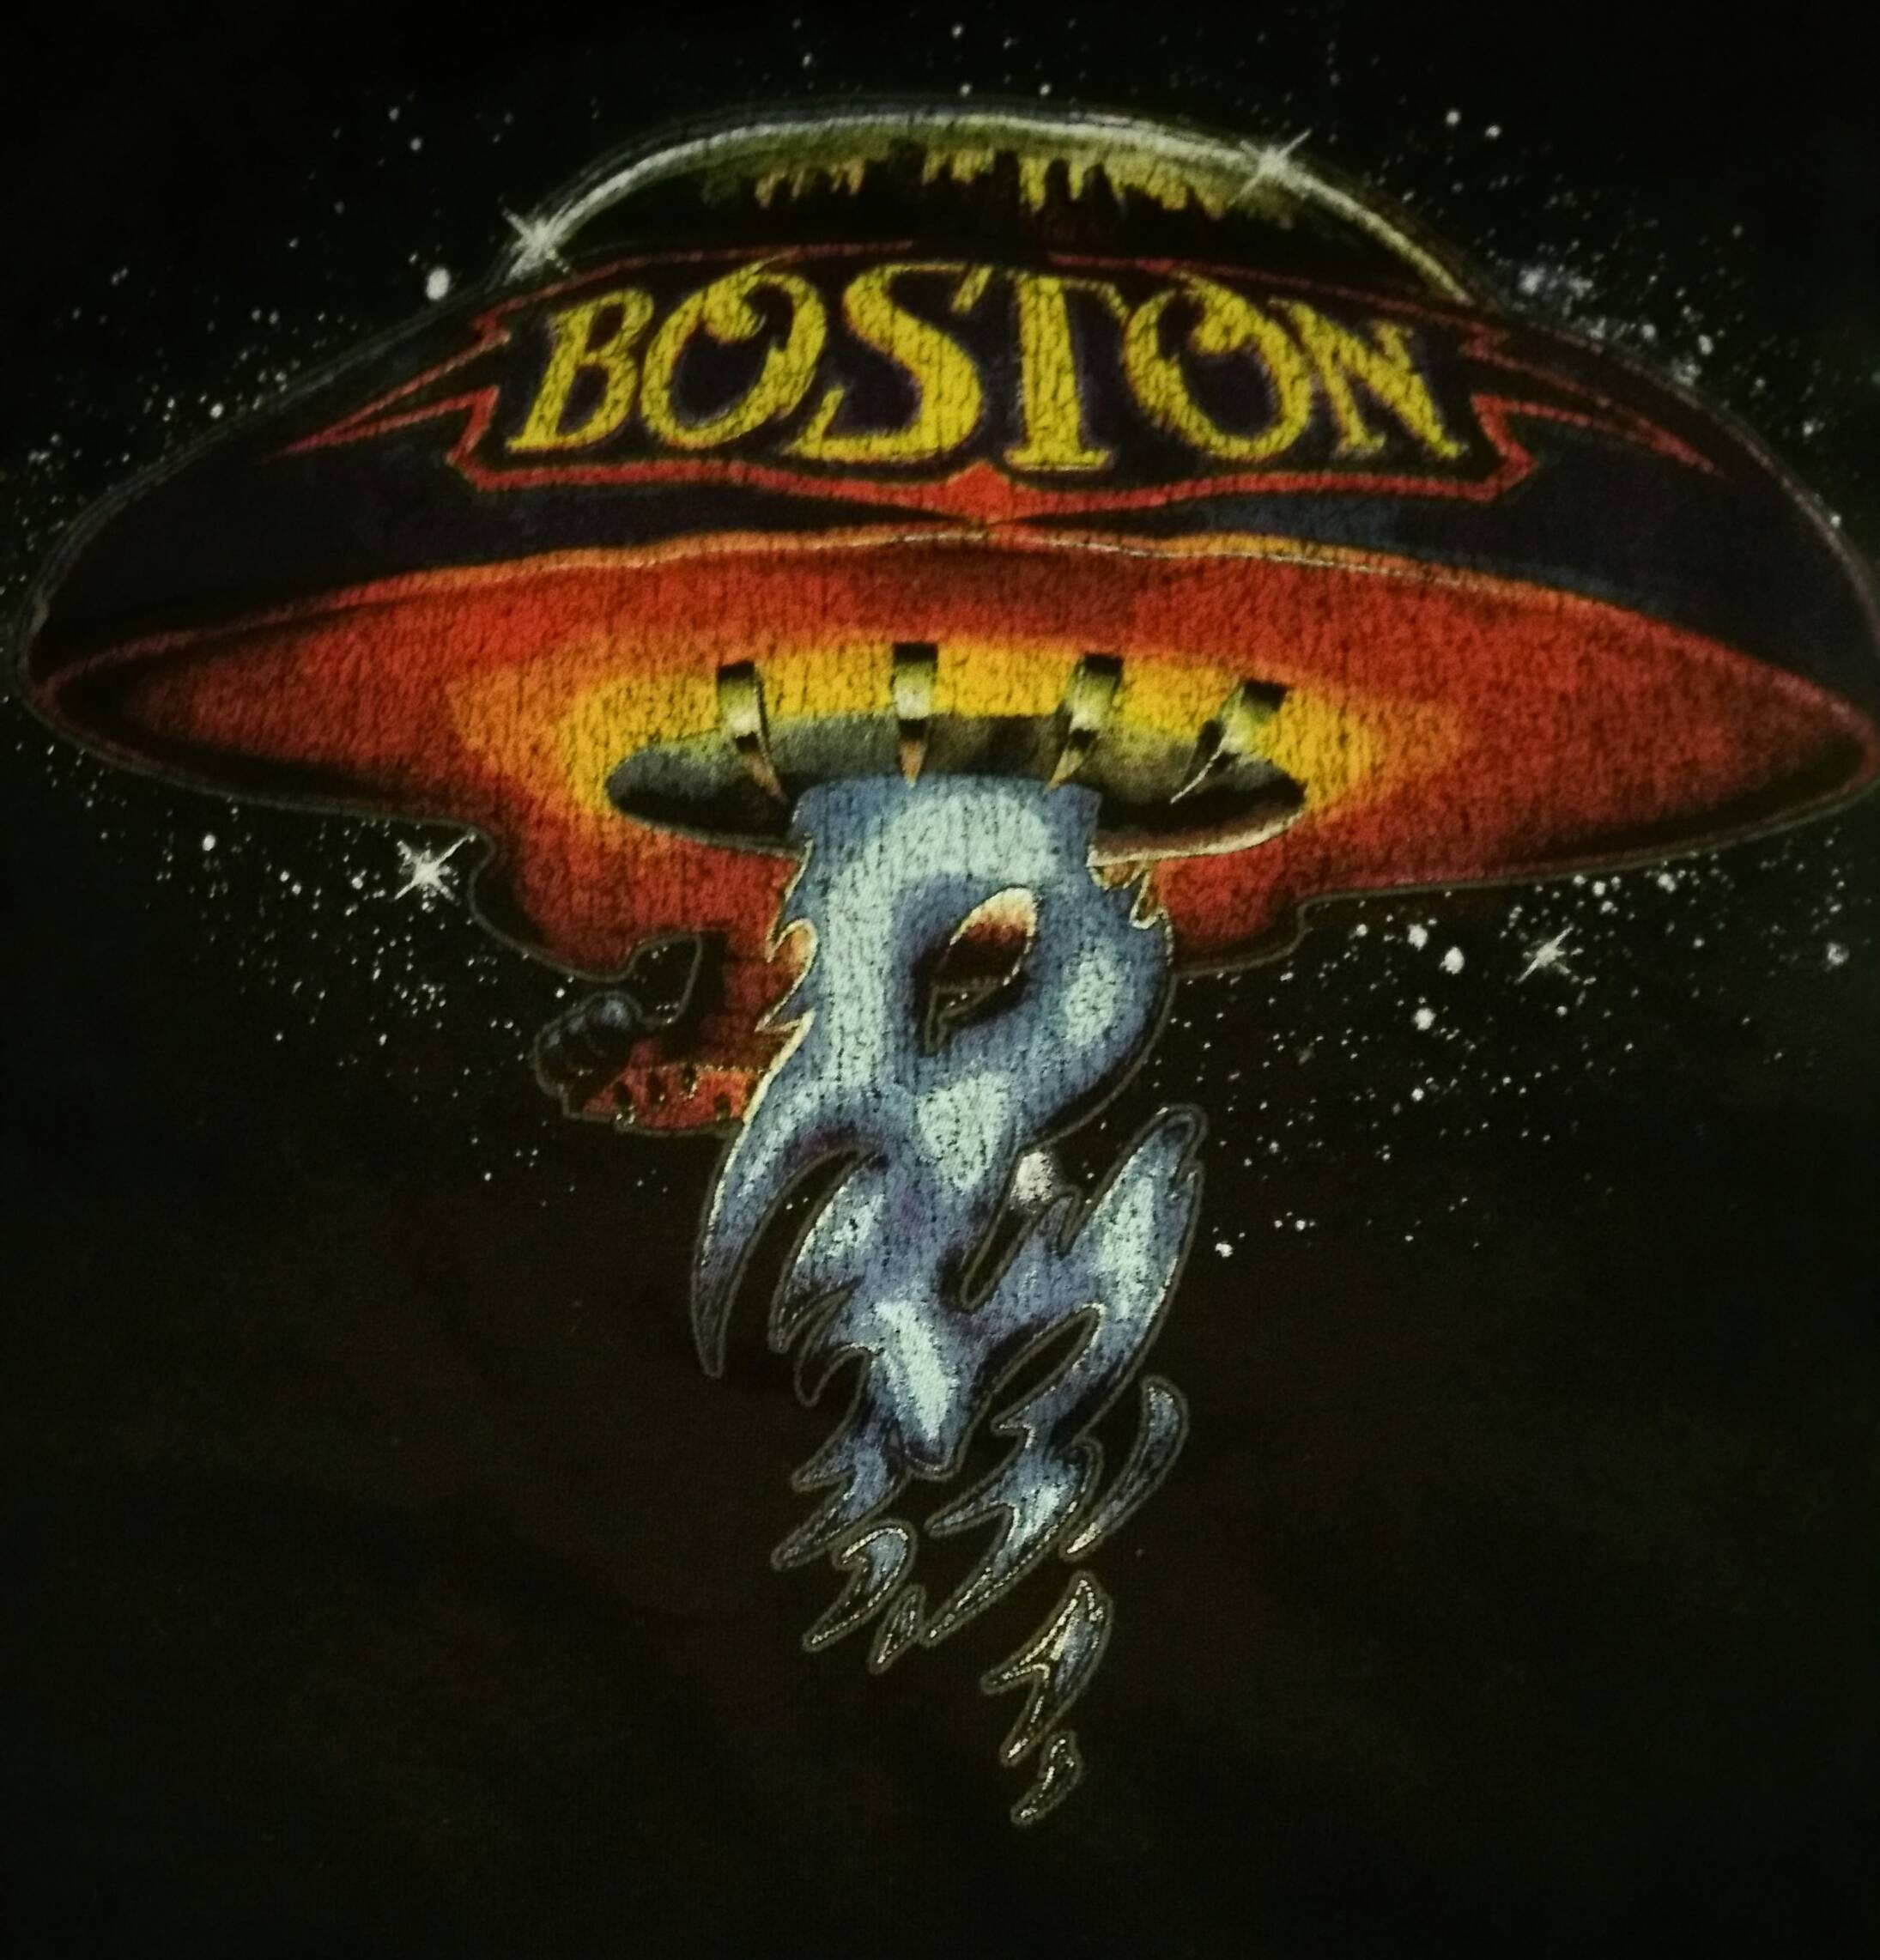 Boston Band Logo - Boston at 40 and rockin' the Joint! | Reason Rest Stop